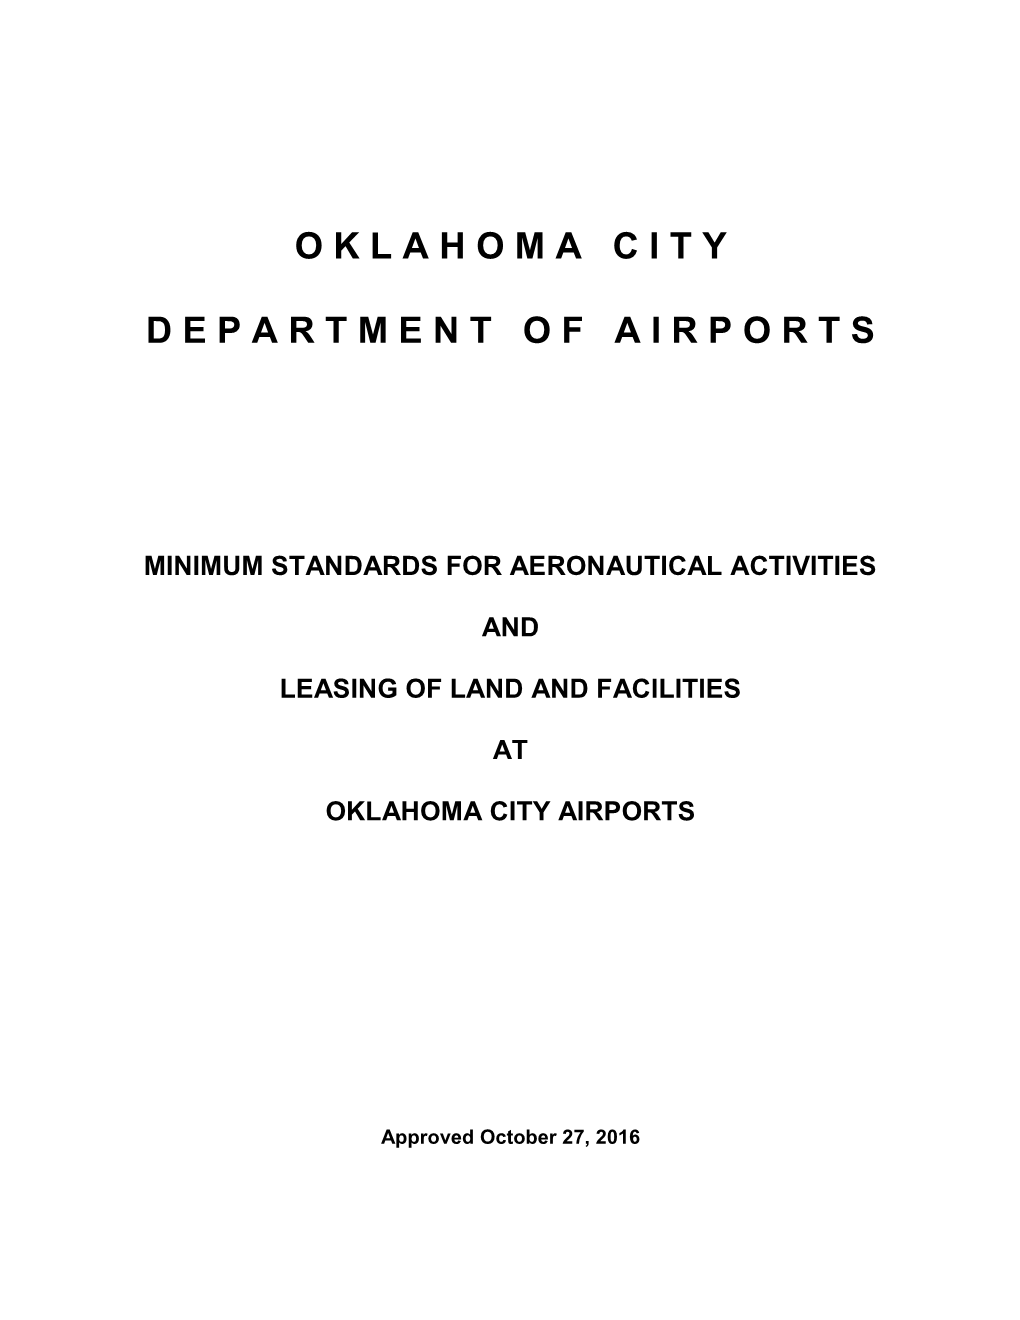 Minimum Standards for Aeronautical Activities and Leasing of Land And